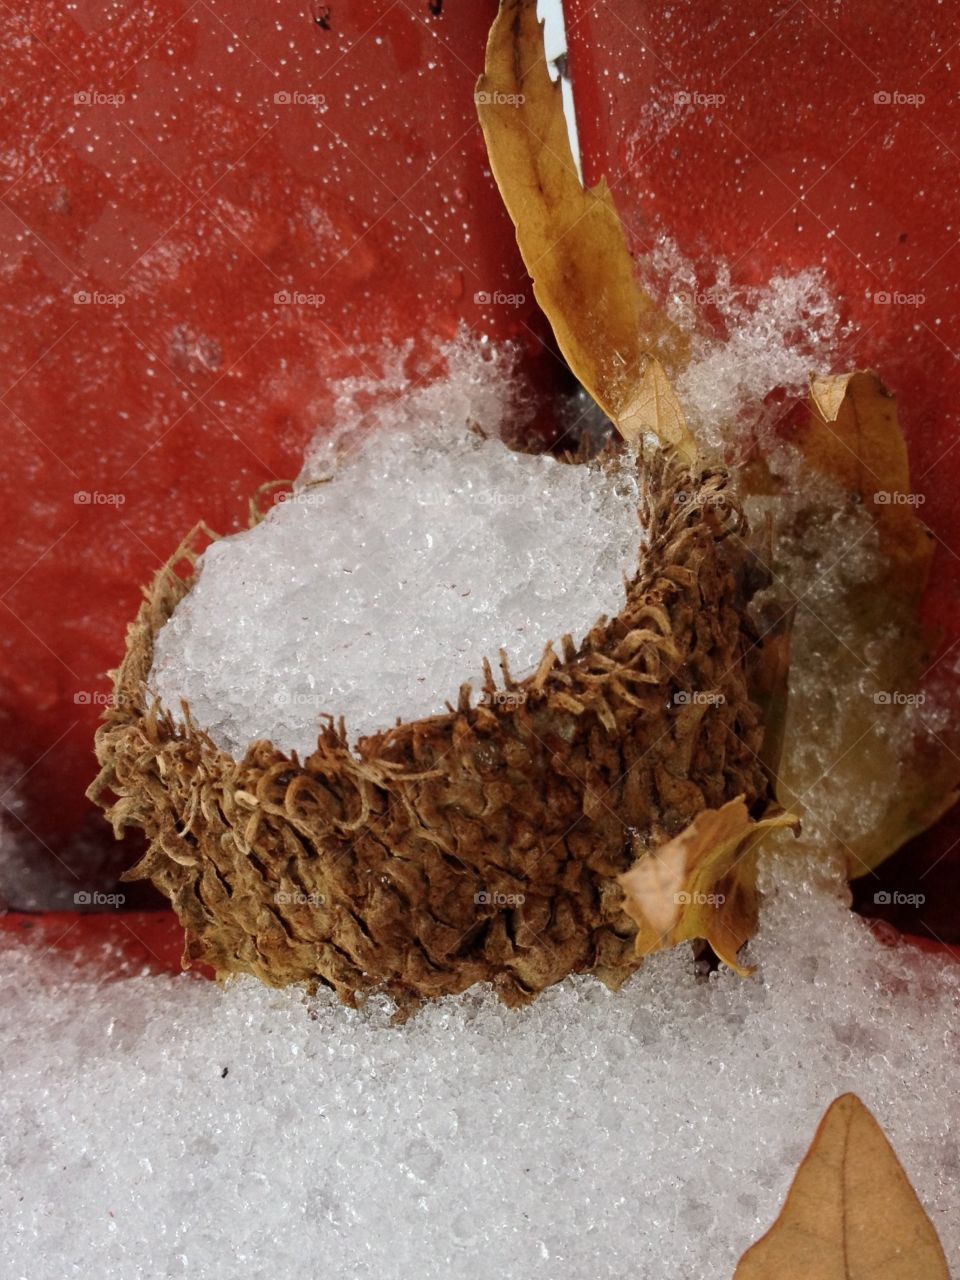 Acorn shell filled with snow 